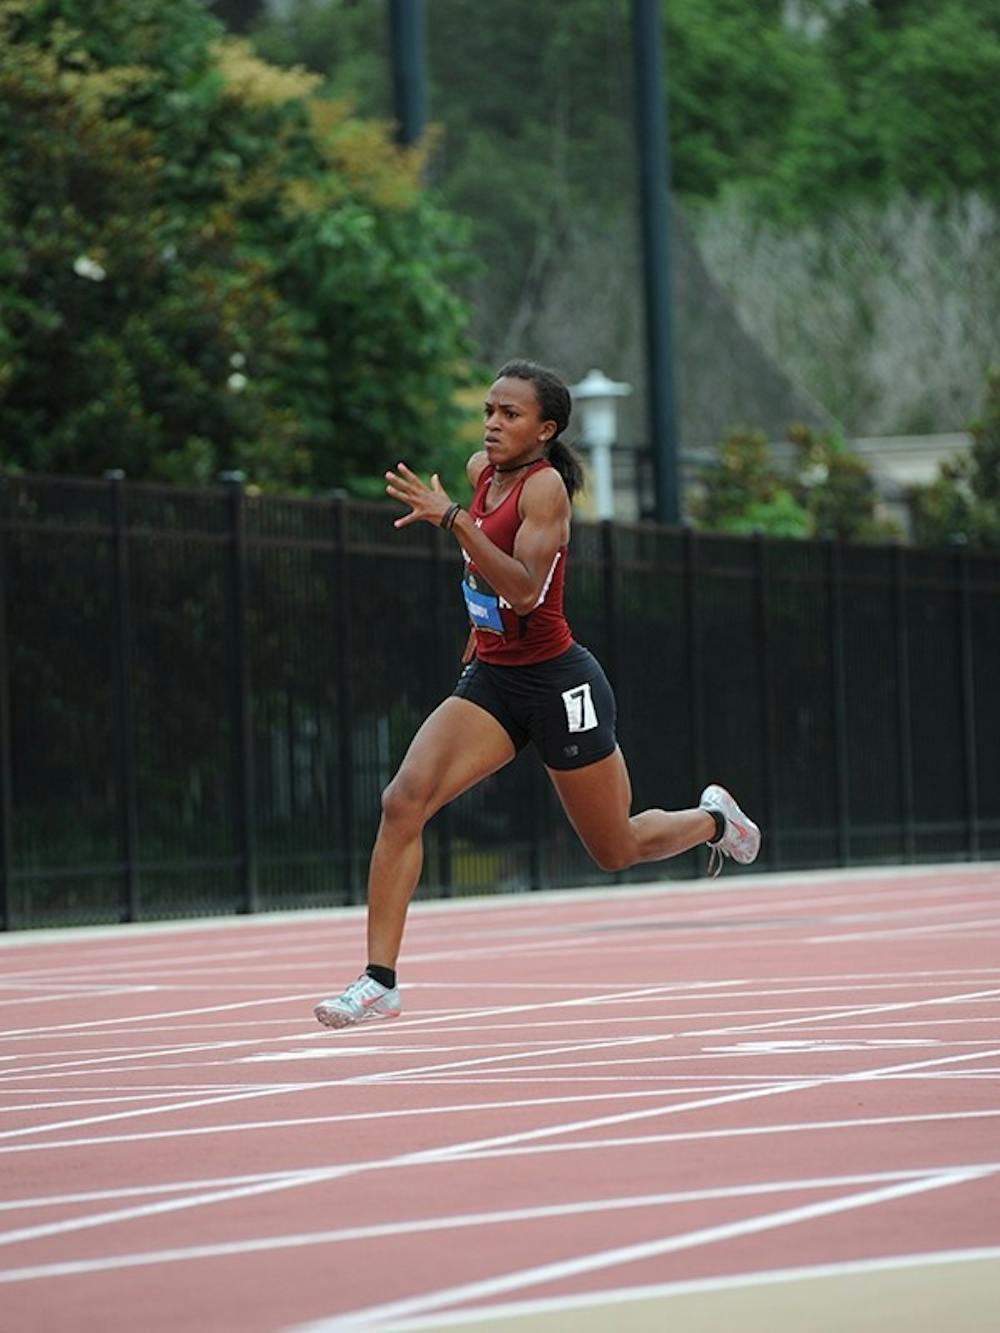 unior Vashti Bandy said she was pretty happy with her performance in the Hurricane Invitational last weekend, where she was part of a winning relay.